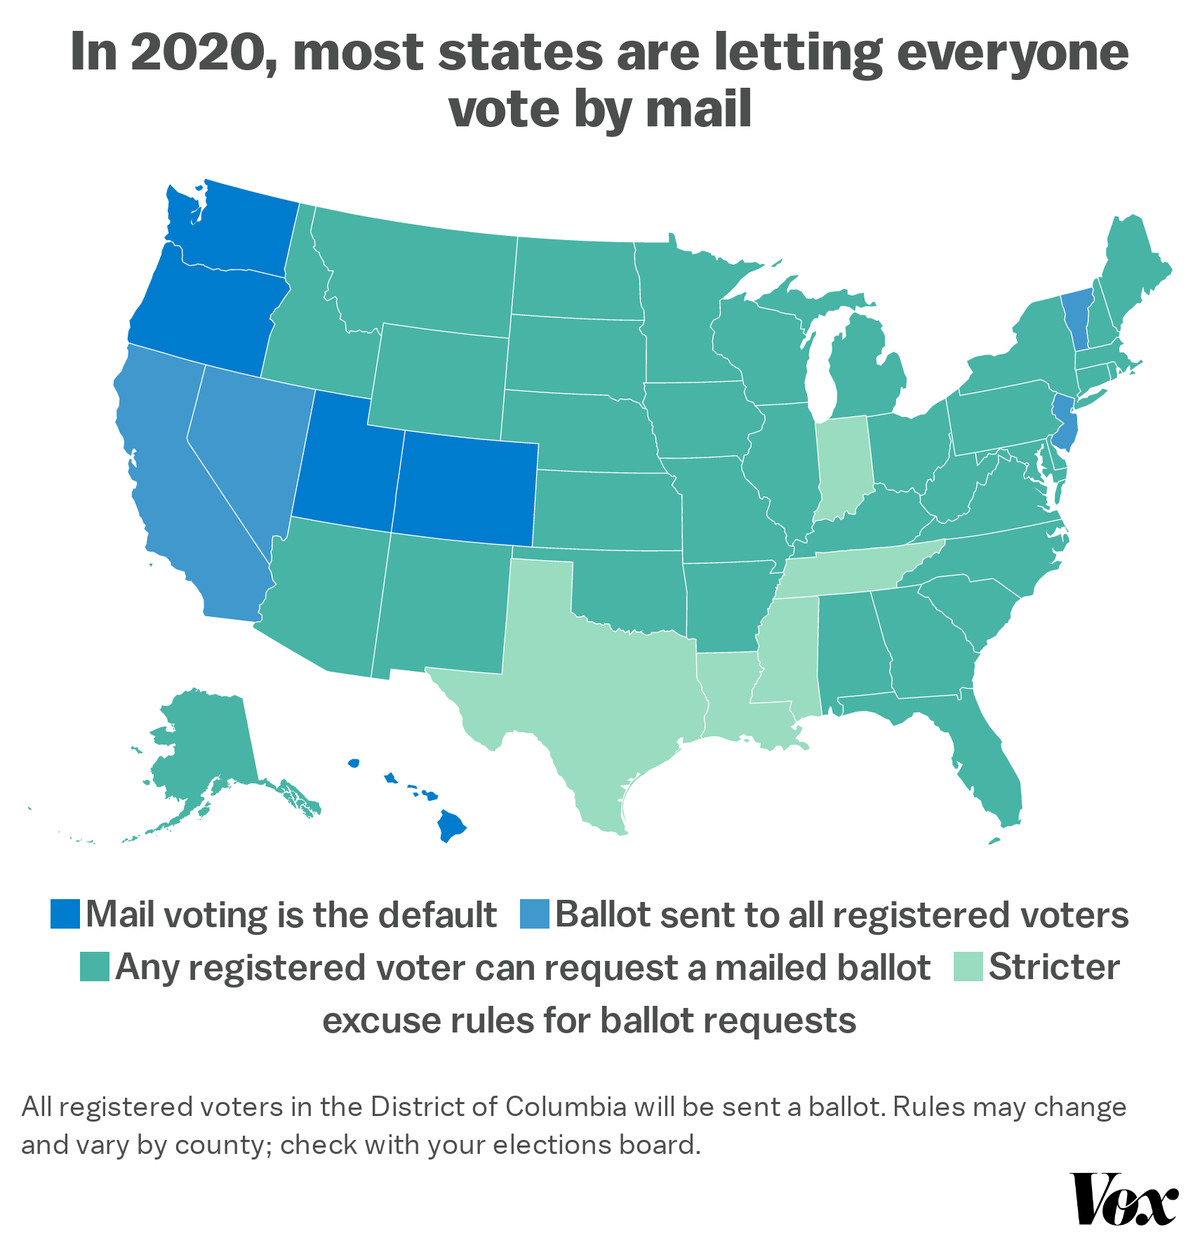 Chart: “In 2020, most states are letting everyone vote by mail”